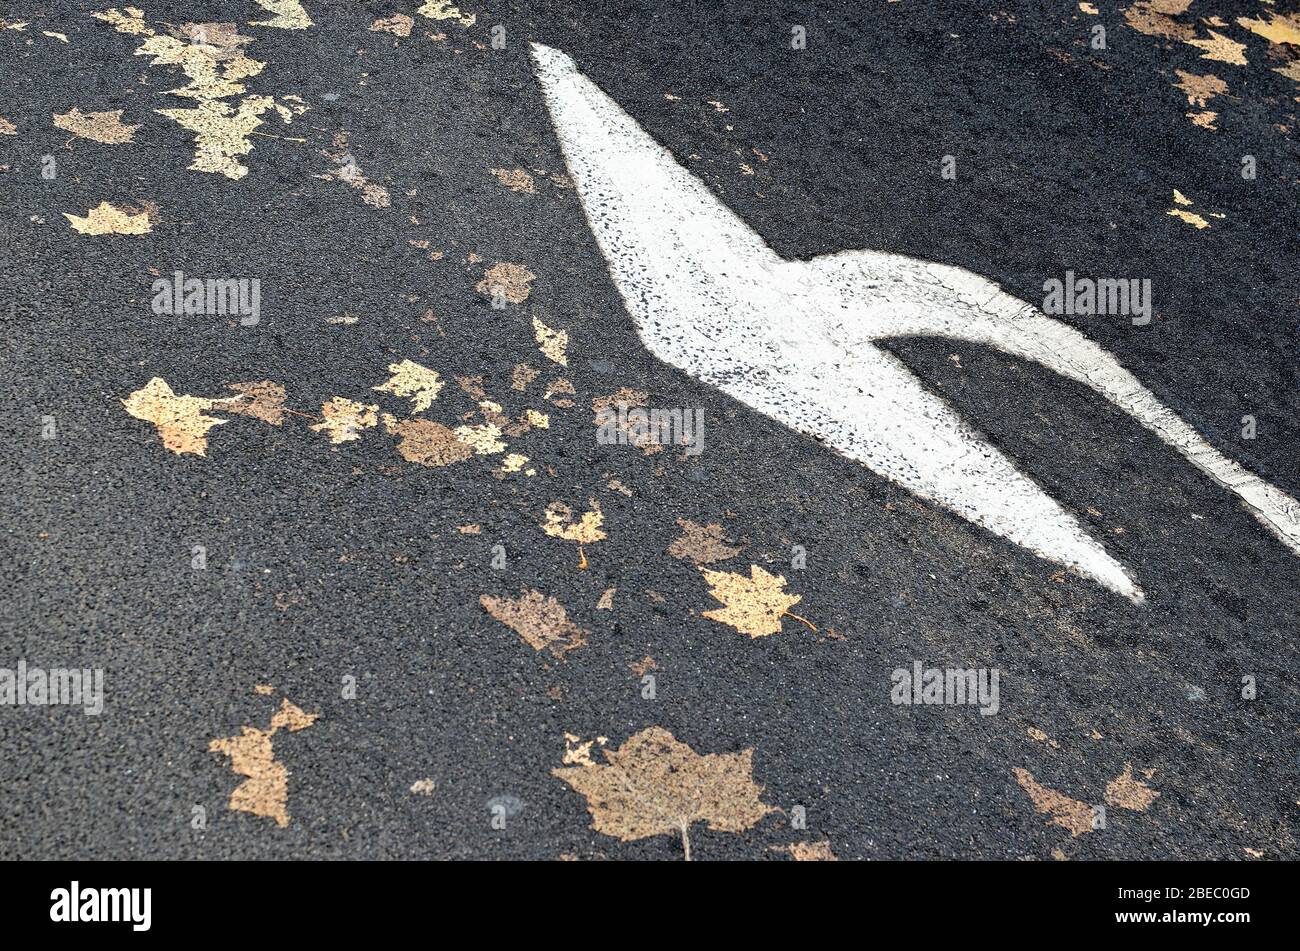 A painted arrow on a road surface with flattened autumnal leaves forming an abstract image Stock Photo